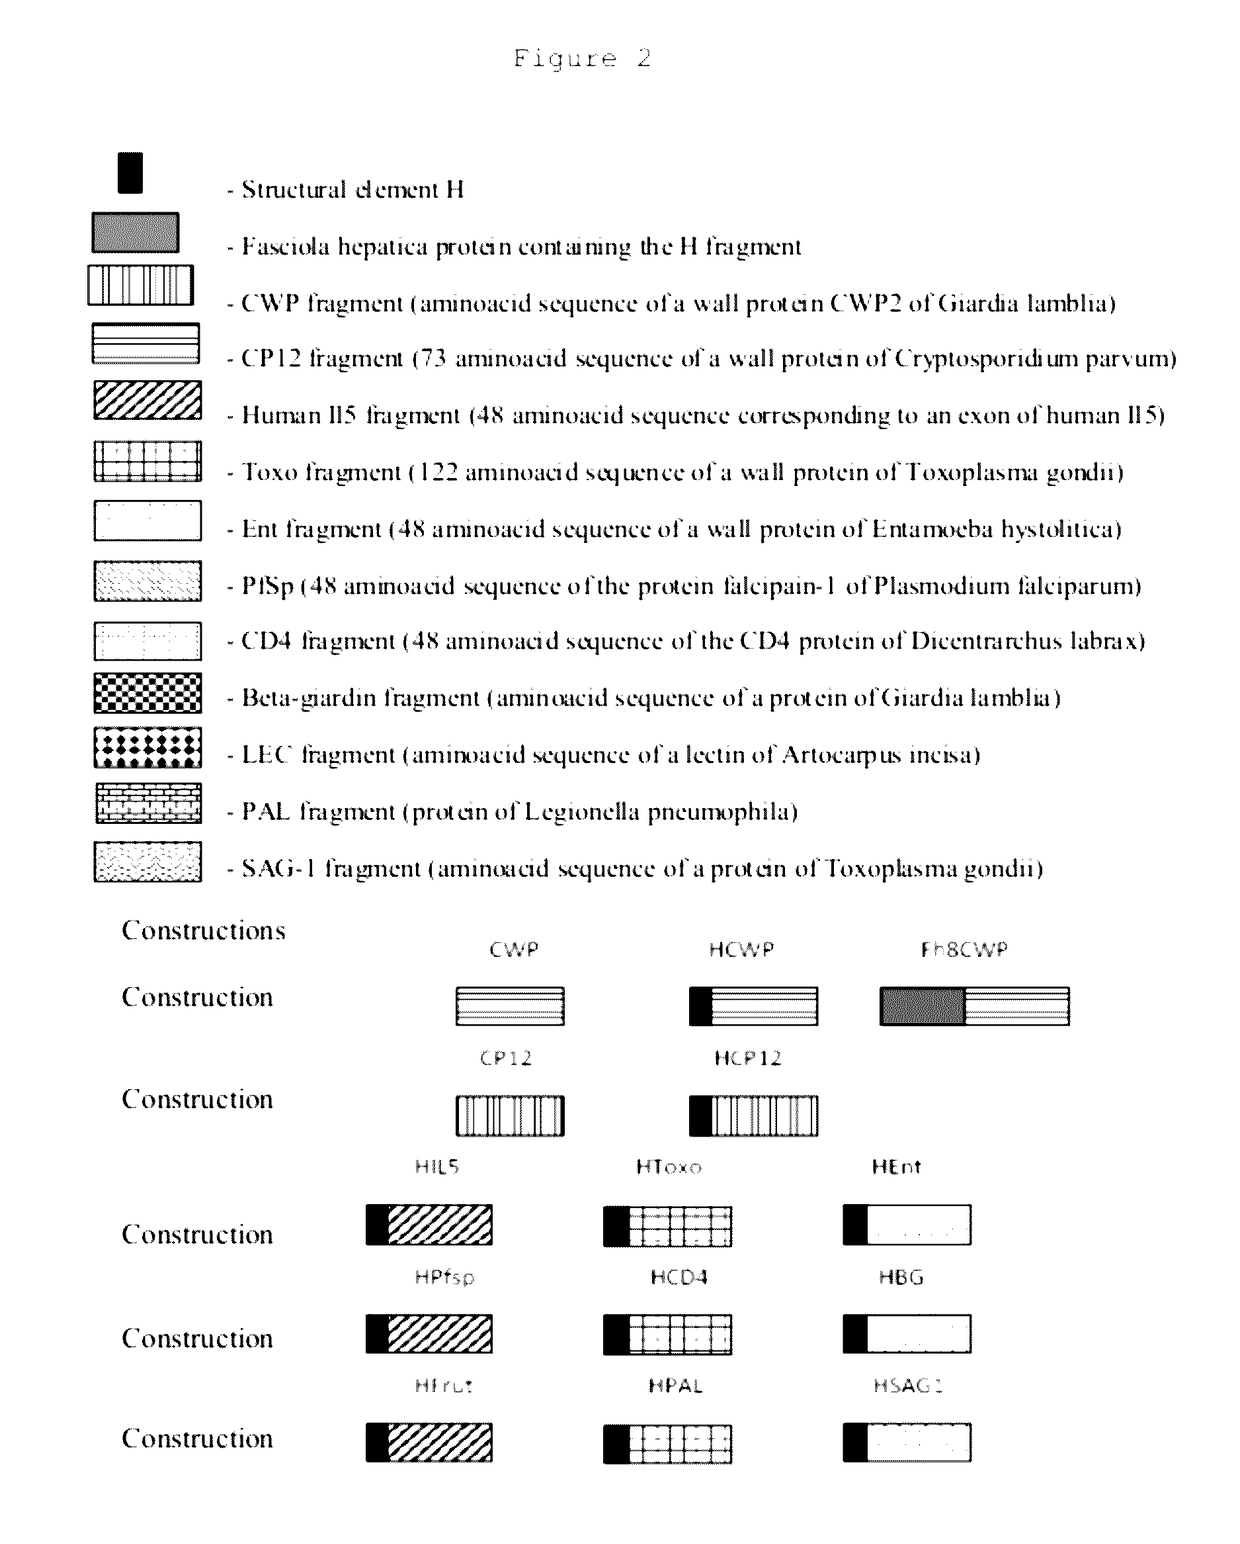 Immunogens, compositions and uses thereof, method for preparing same